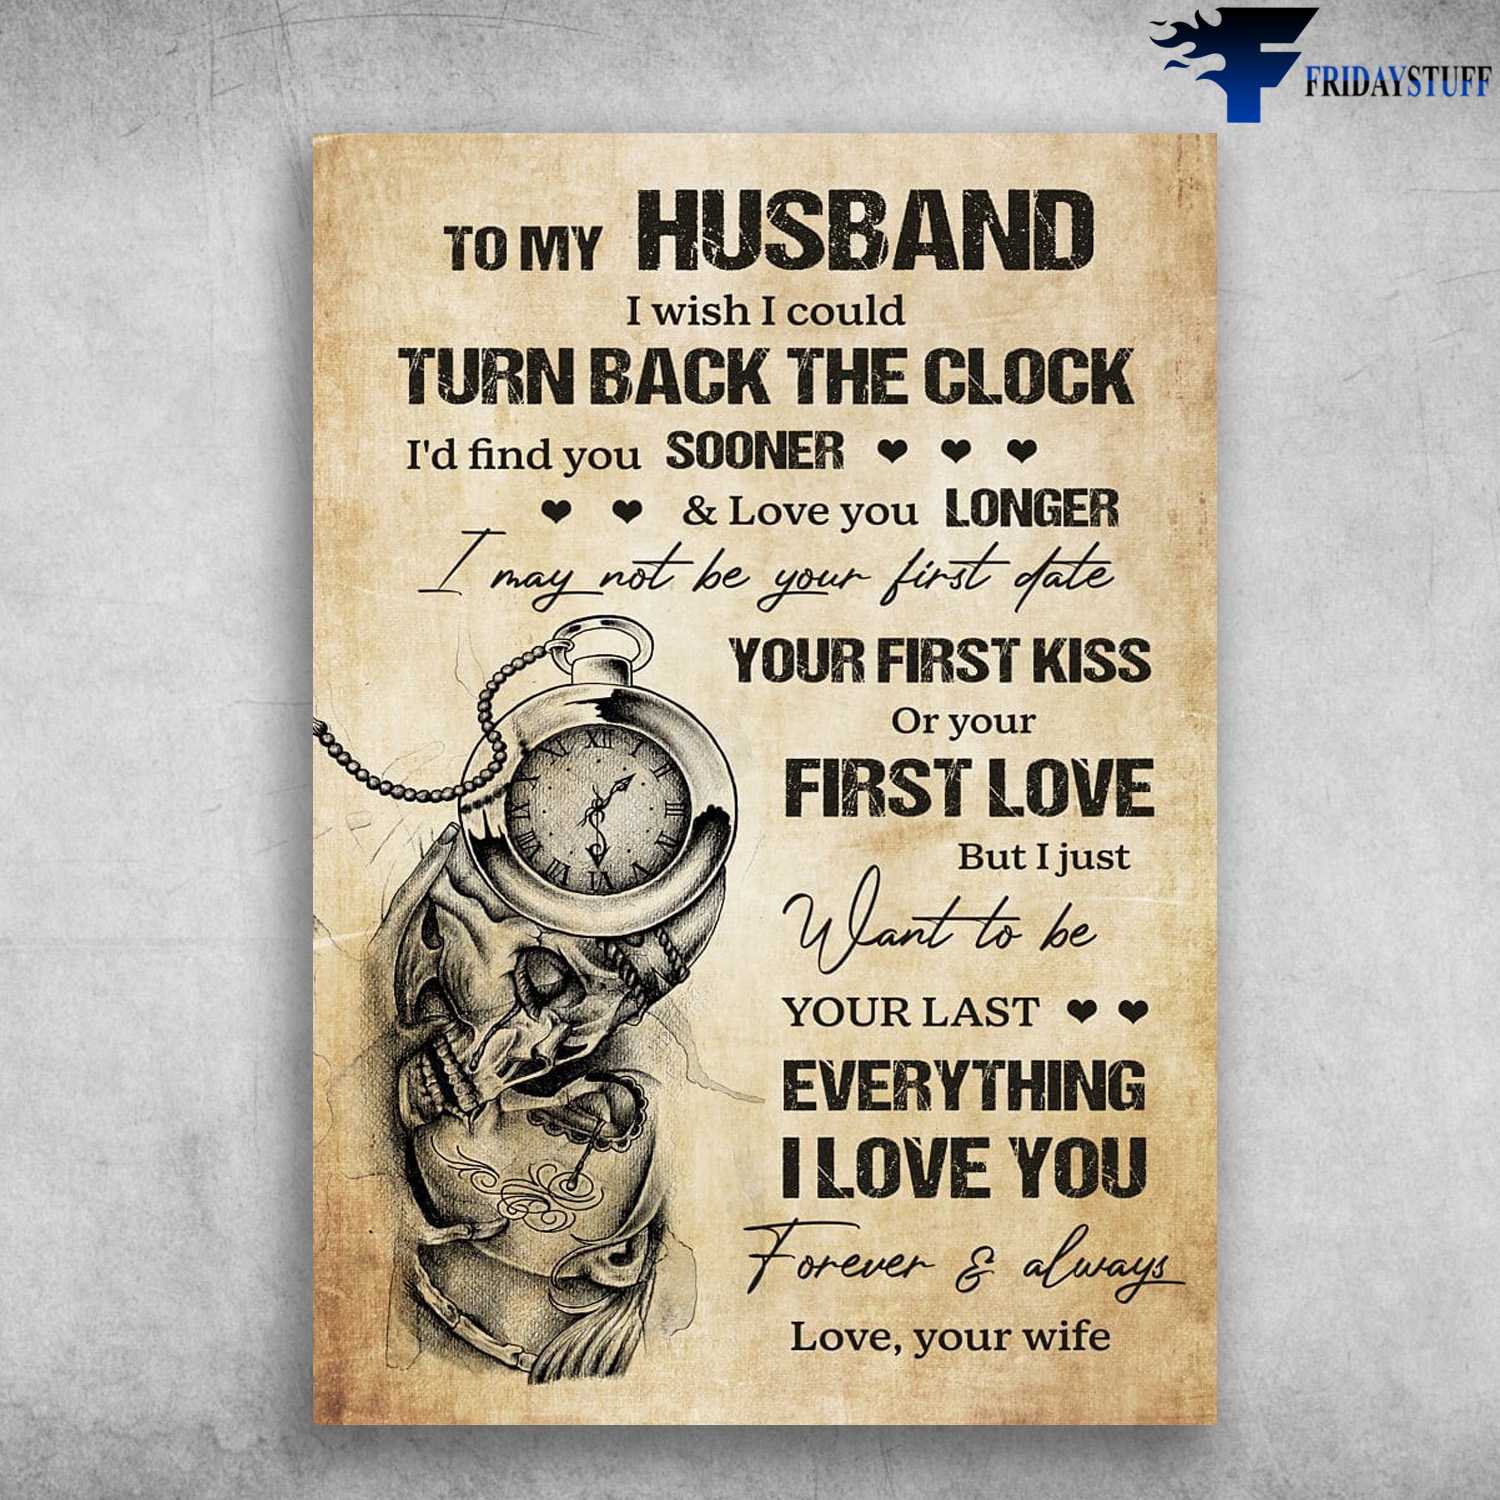 Husband Gift, Husband And Wife, To My Husband, I Wish I Could Turn Back The Clock, I'd Find You Sooner, And Love You Longer, I May Not Be Your First Date, Your First Kiss